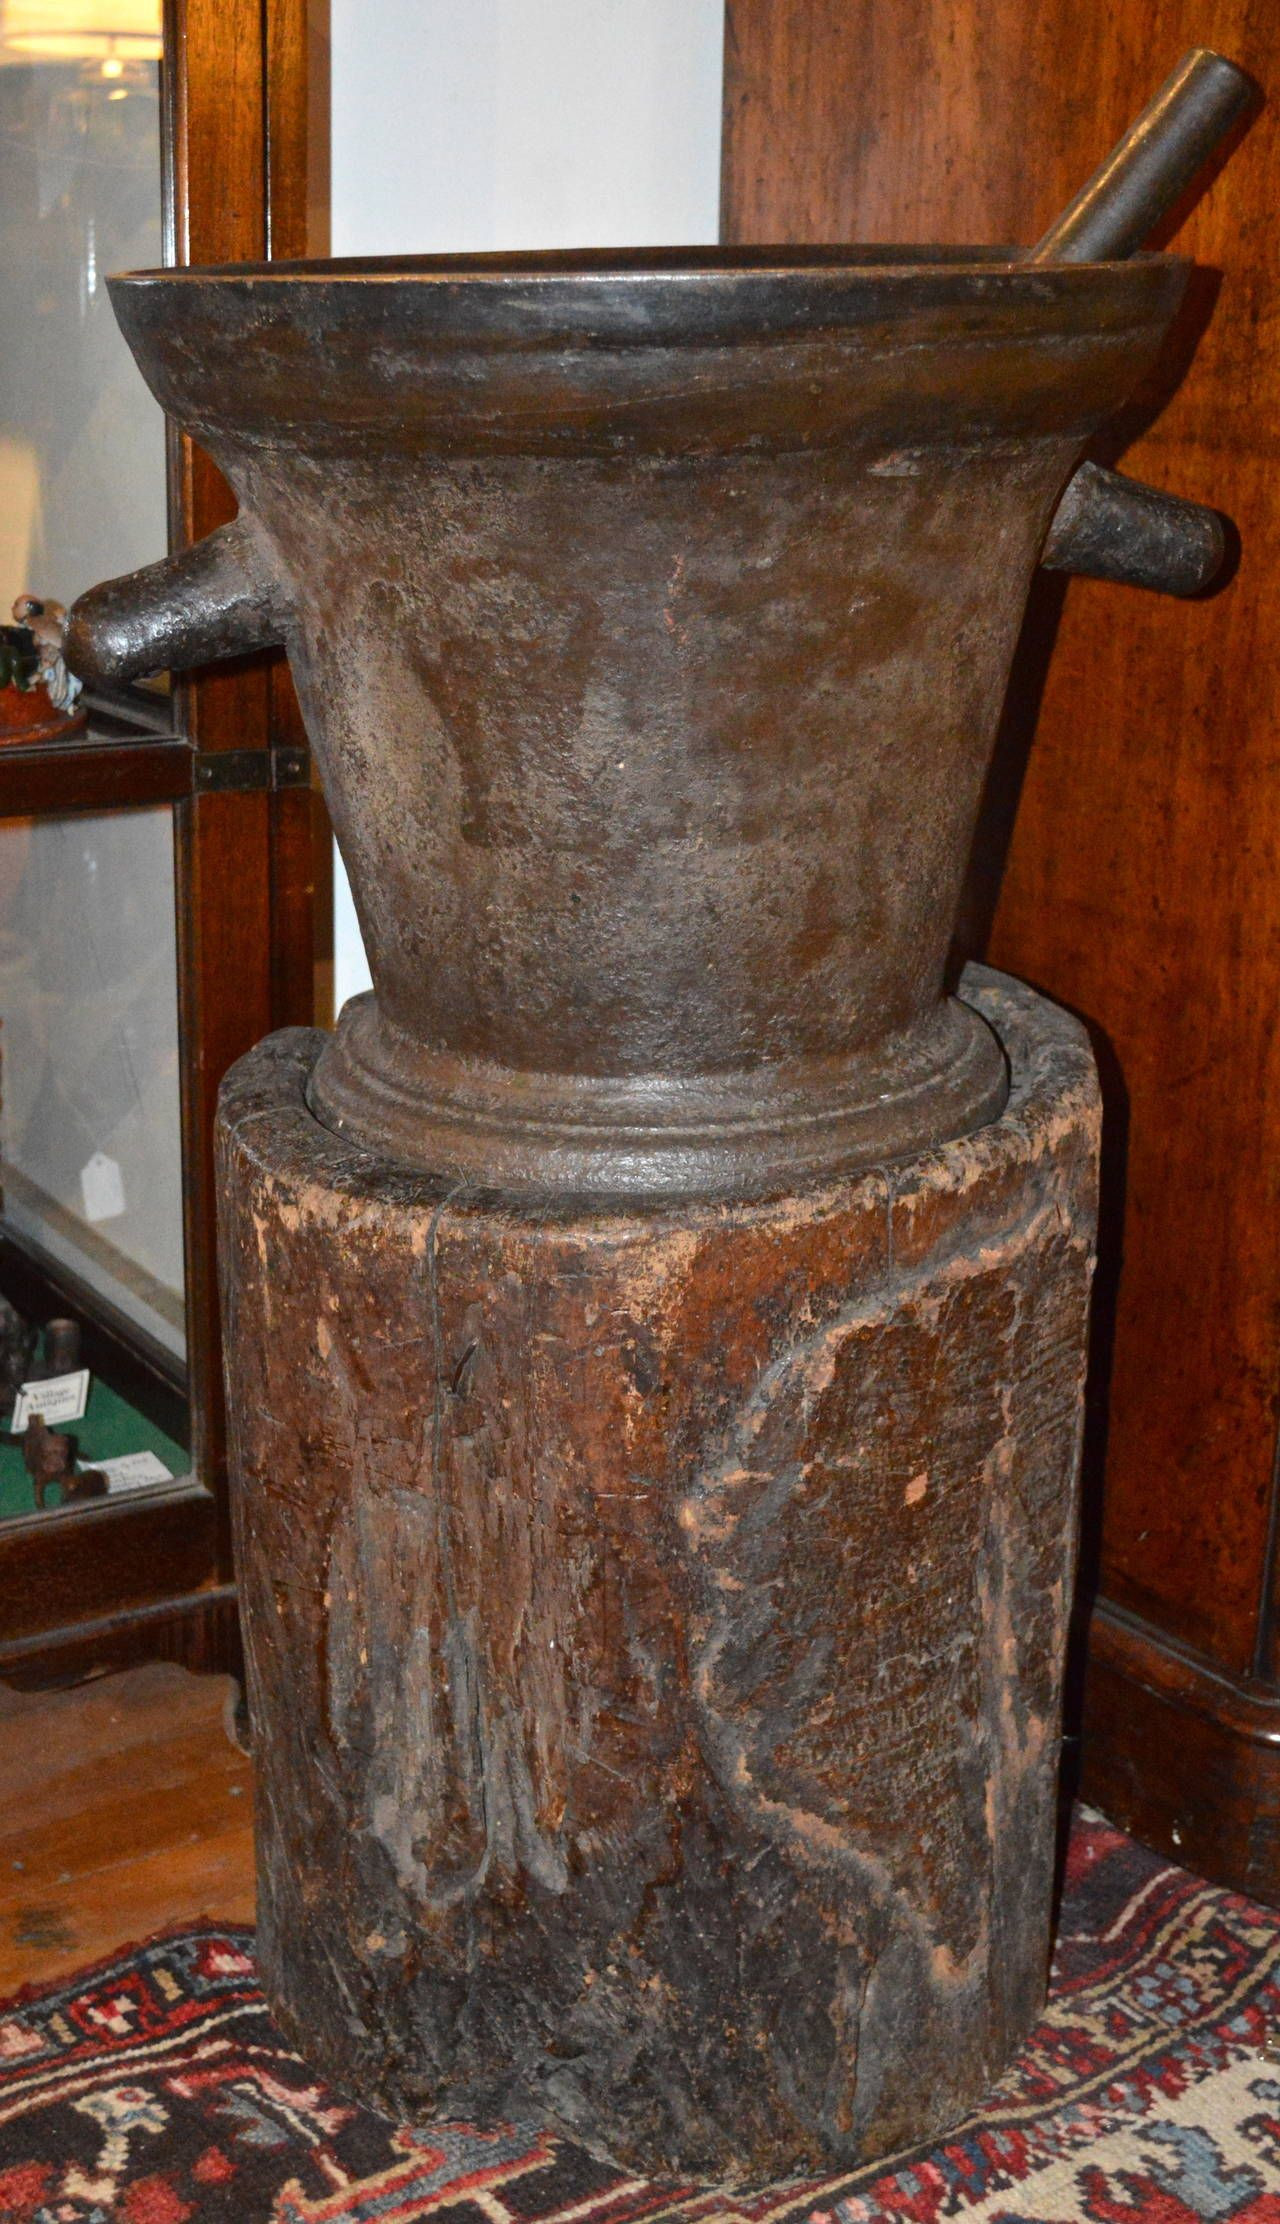 15 Popular Wrought Iron Vase 2024 free download wrought iron vase of 18th century cast iron mortar and pestle mounted on stump in 18th century cast iron mortar and pestle mounted on stump image 2